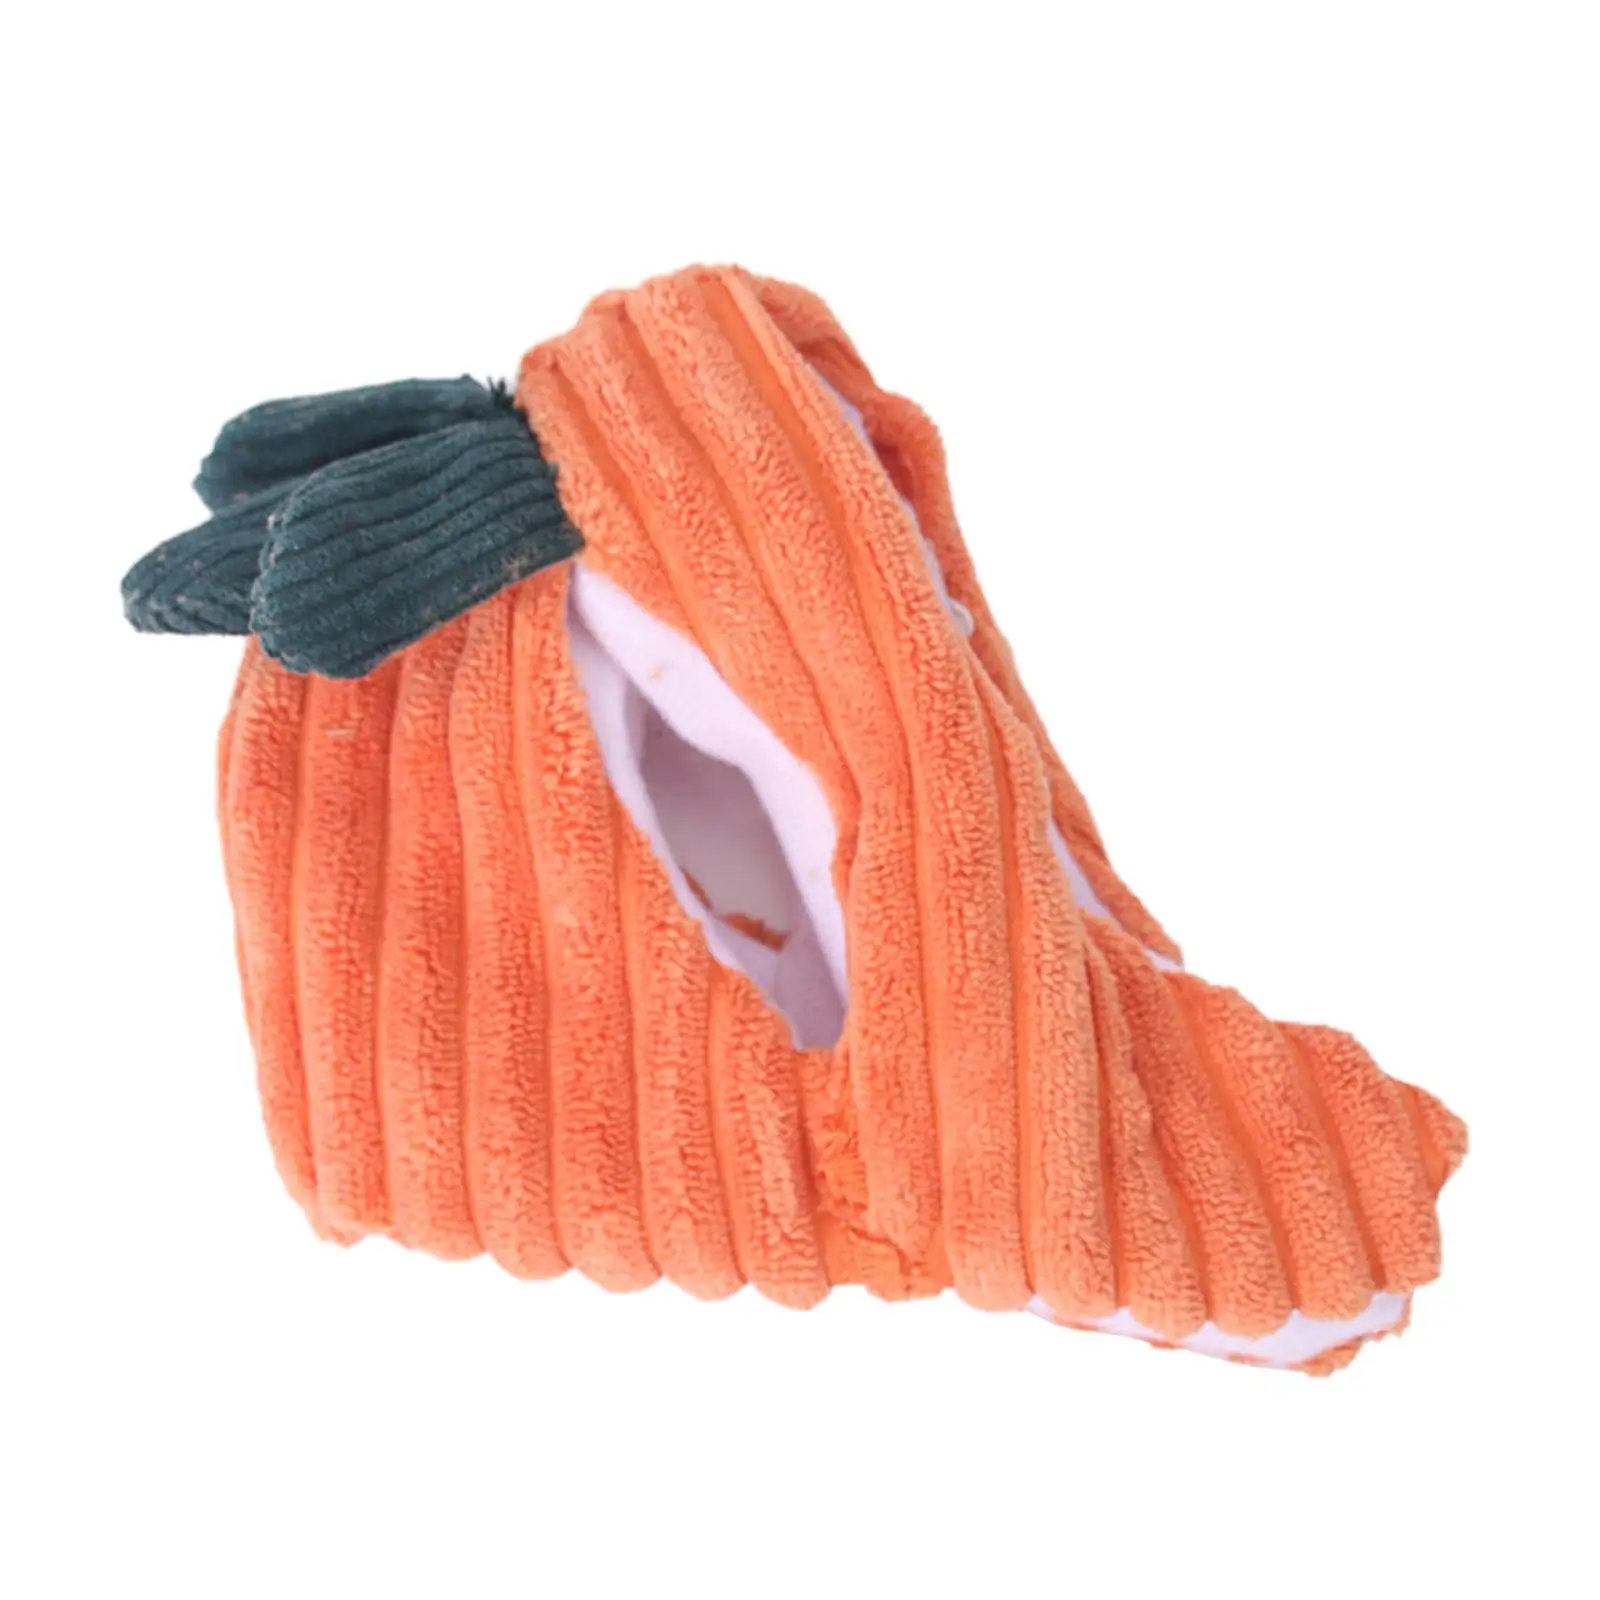 Carrot Pets Hood Plush for Cat Puppy Dog Small Pet Headwear for Festivals